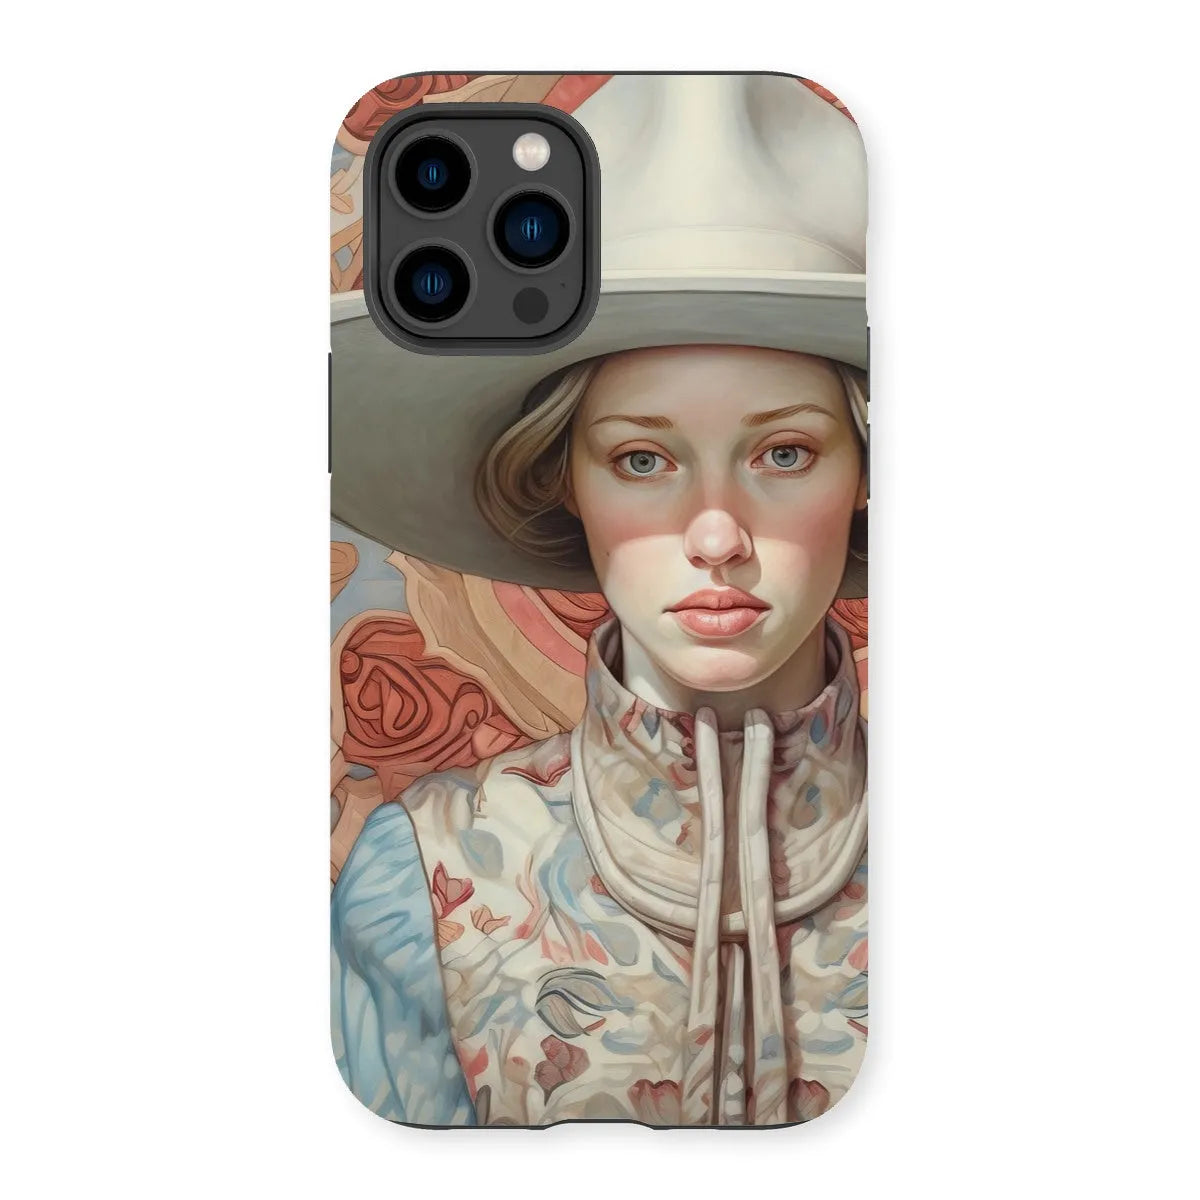 Lottie The Lesbian Cowgirl - Sapphic Art Phone Case - Iphone 14 Pro / Matte - Mobile Phone Cases - Aesthetic Art